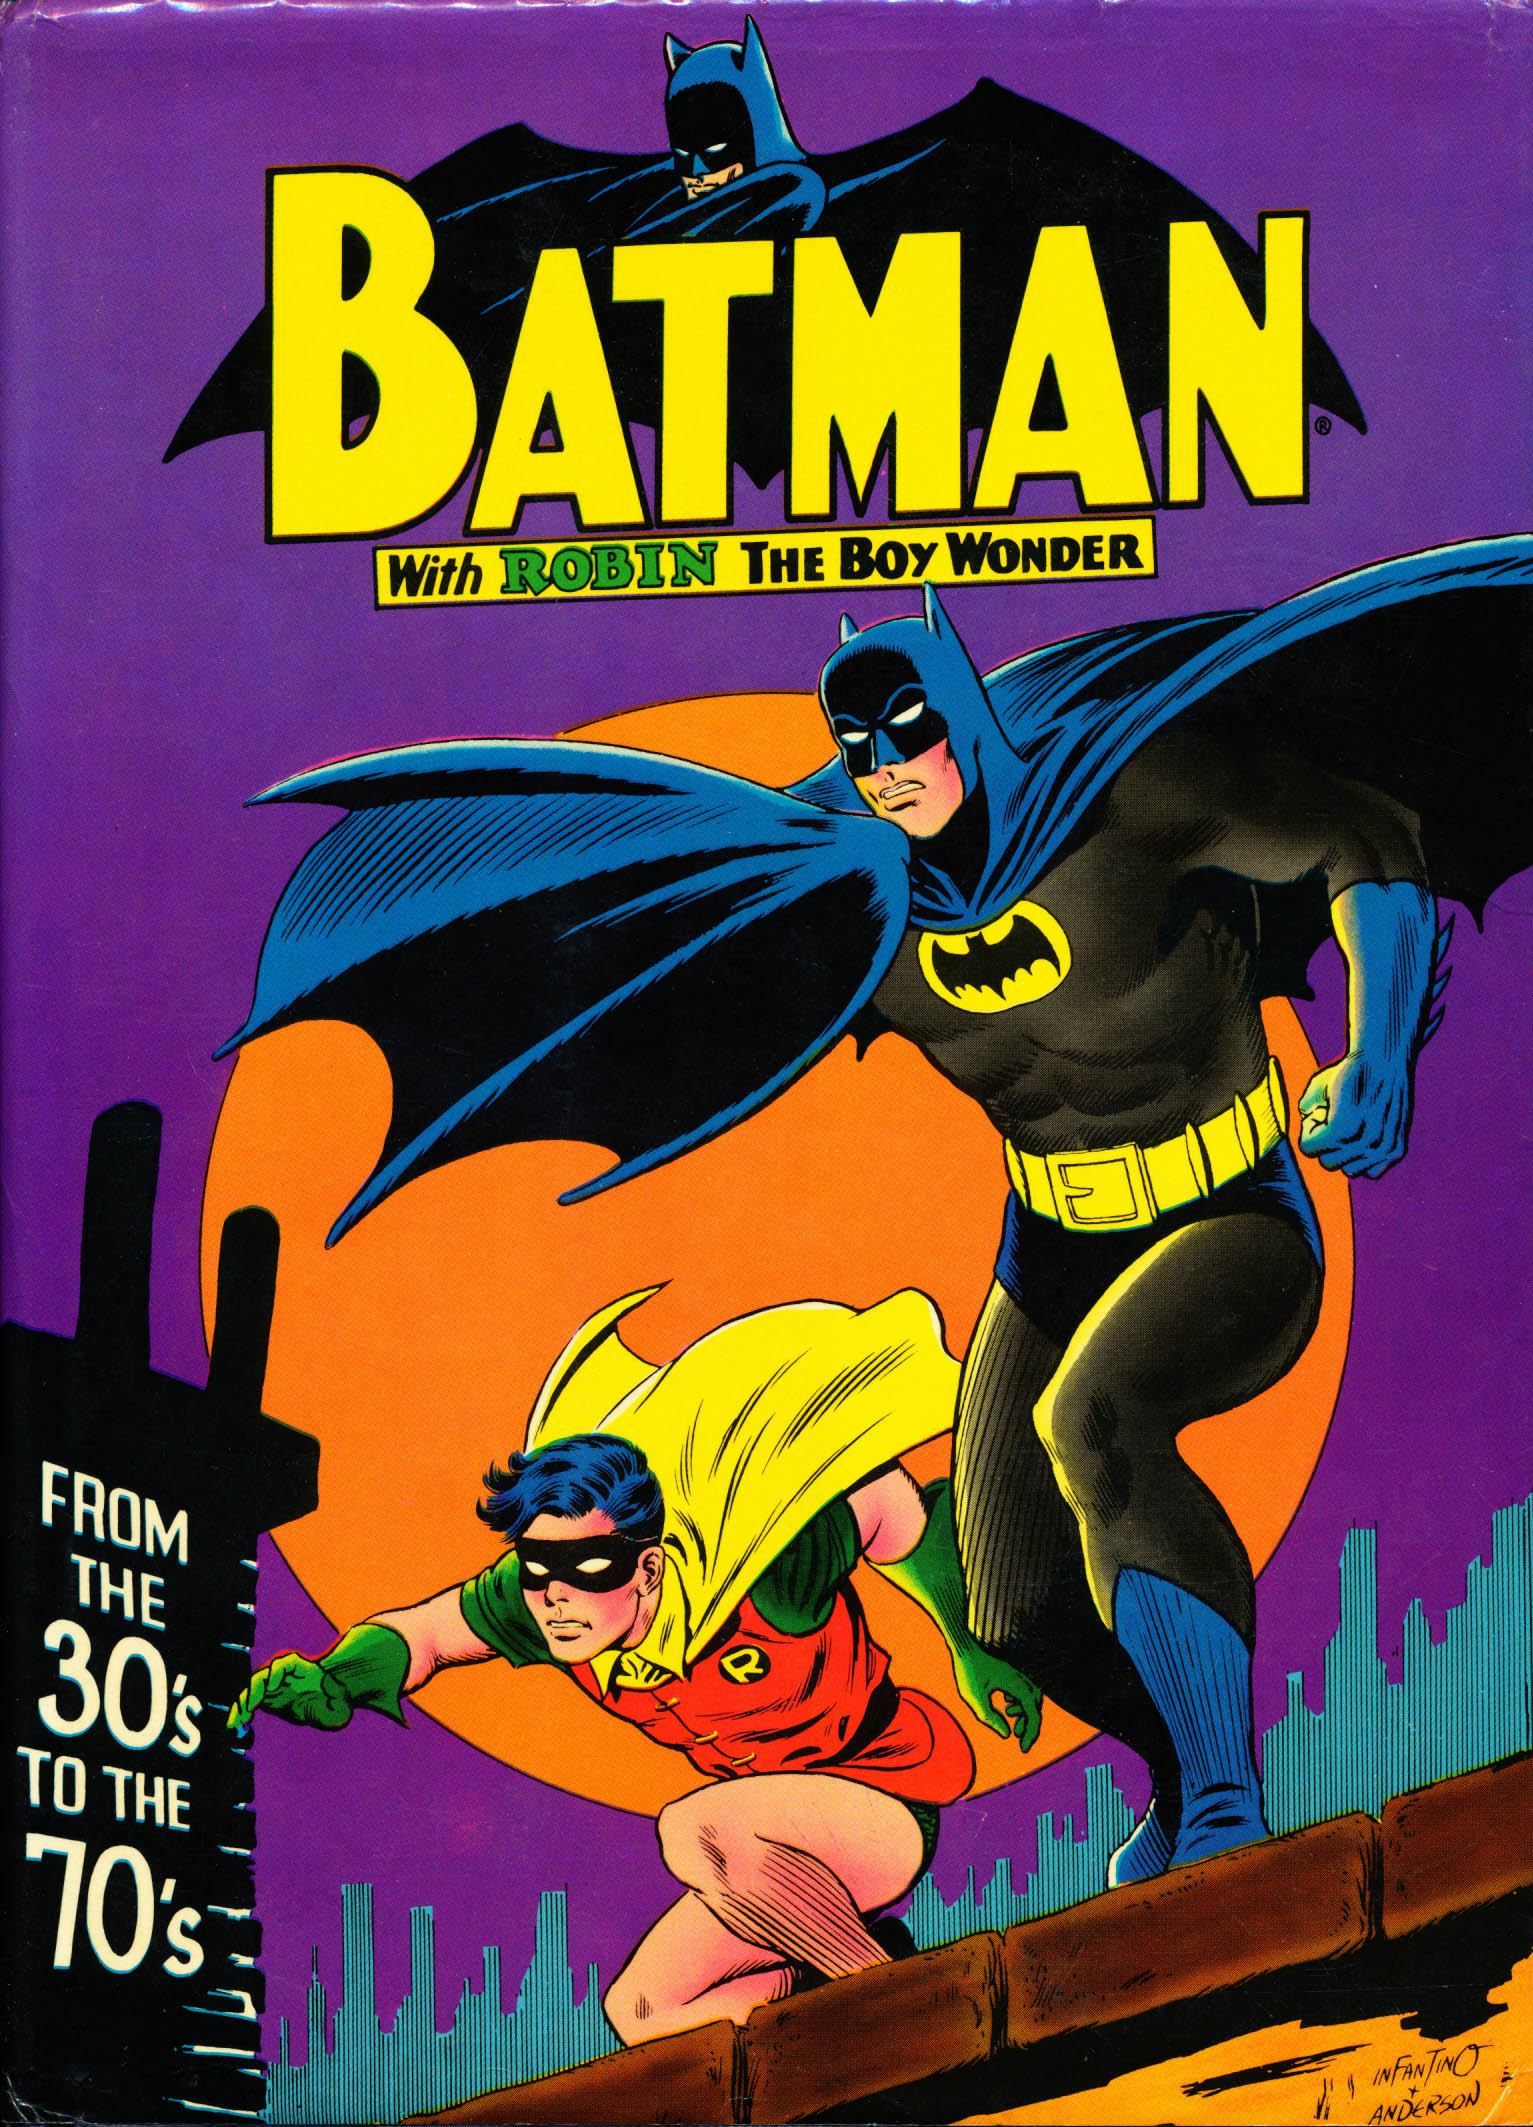 Batman-From-The-30s-To-The-70s.jpg